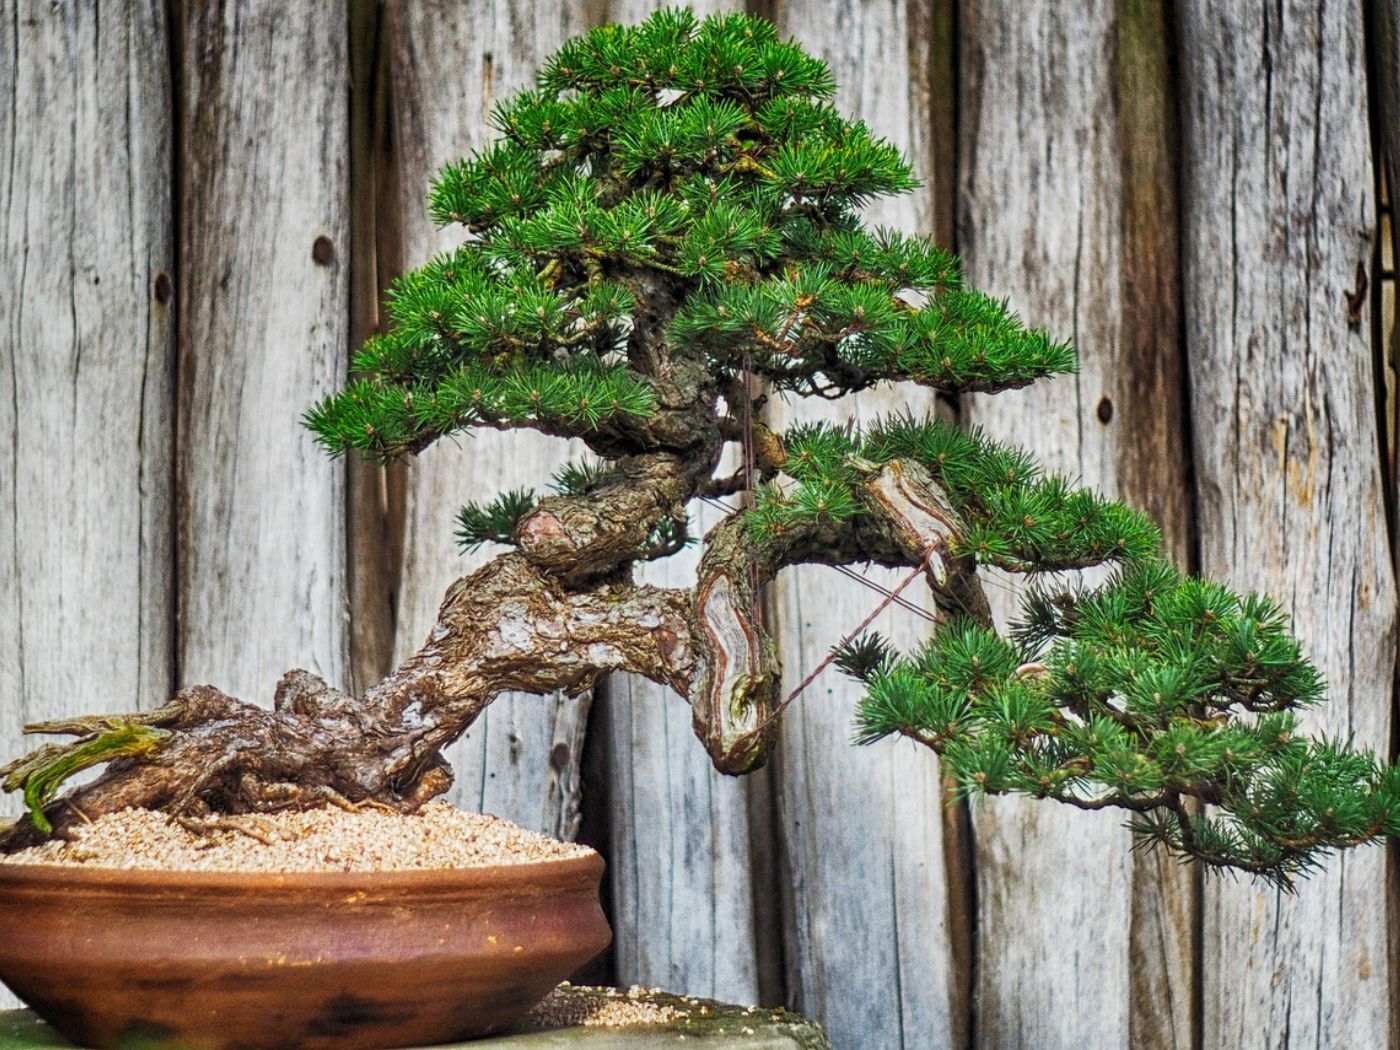 The Main Bonsai Tree Growth Stages | Florgeous